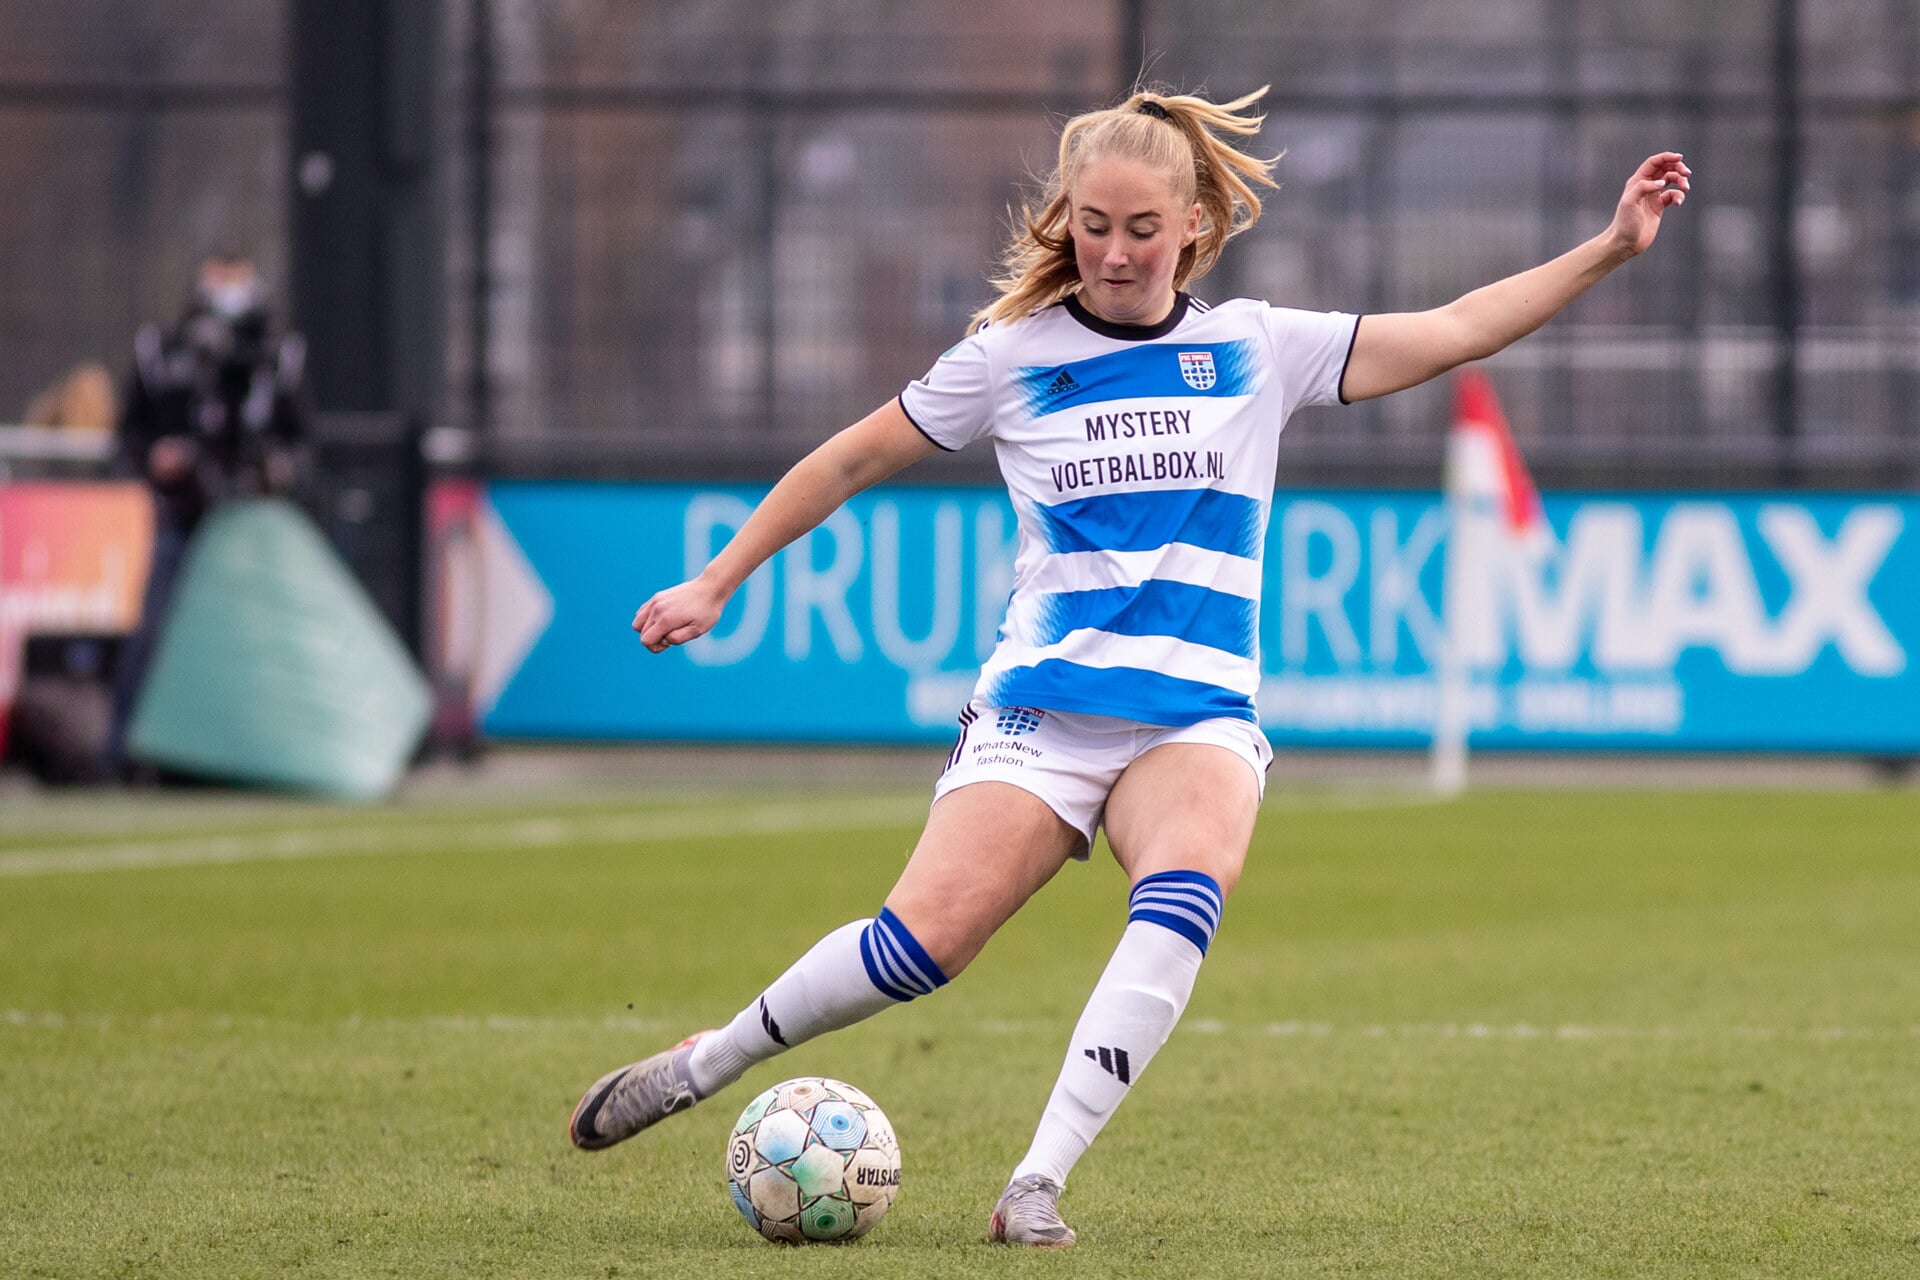 Rotterdam, Netherlands, March 10th 2024: Britt Udink (17 PEC Zwolle) in action during the Azerion Eredivisie Vrouwen football game between Feyenoord and PEC Zwolle in Varkenoord in Rotterdam, Netherlands.  (Leiting Gao / SPP) (Photo by Leiting Gao / SPP/Sipa USA)